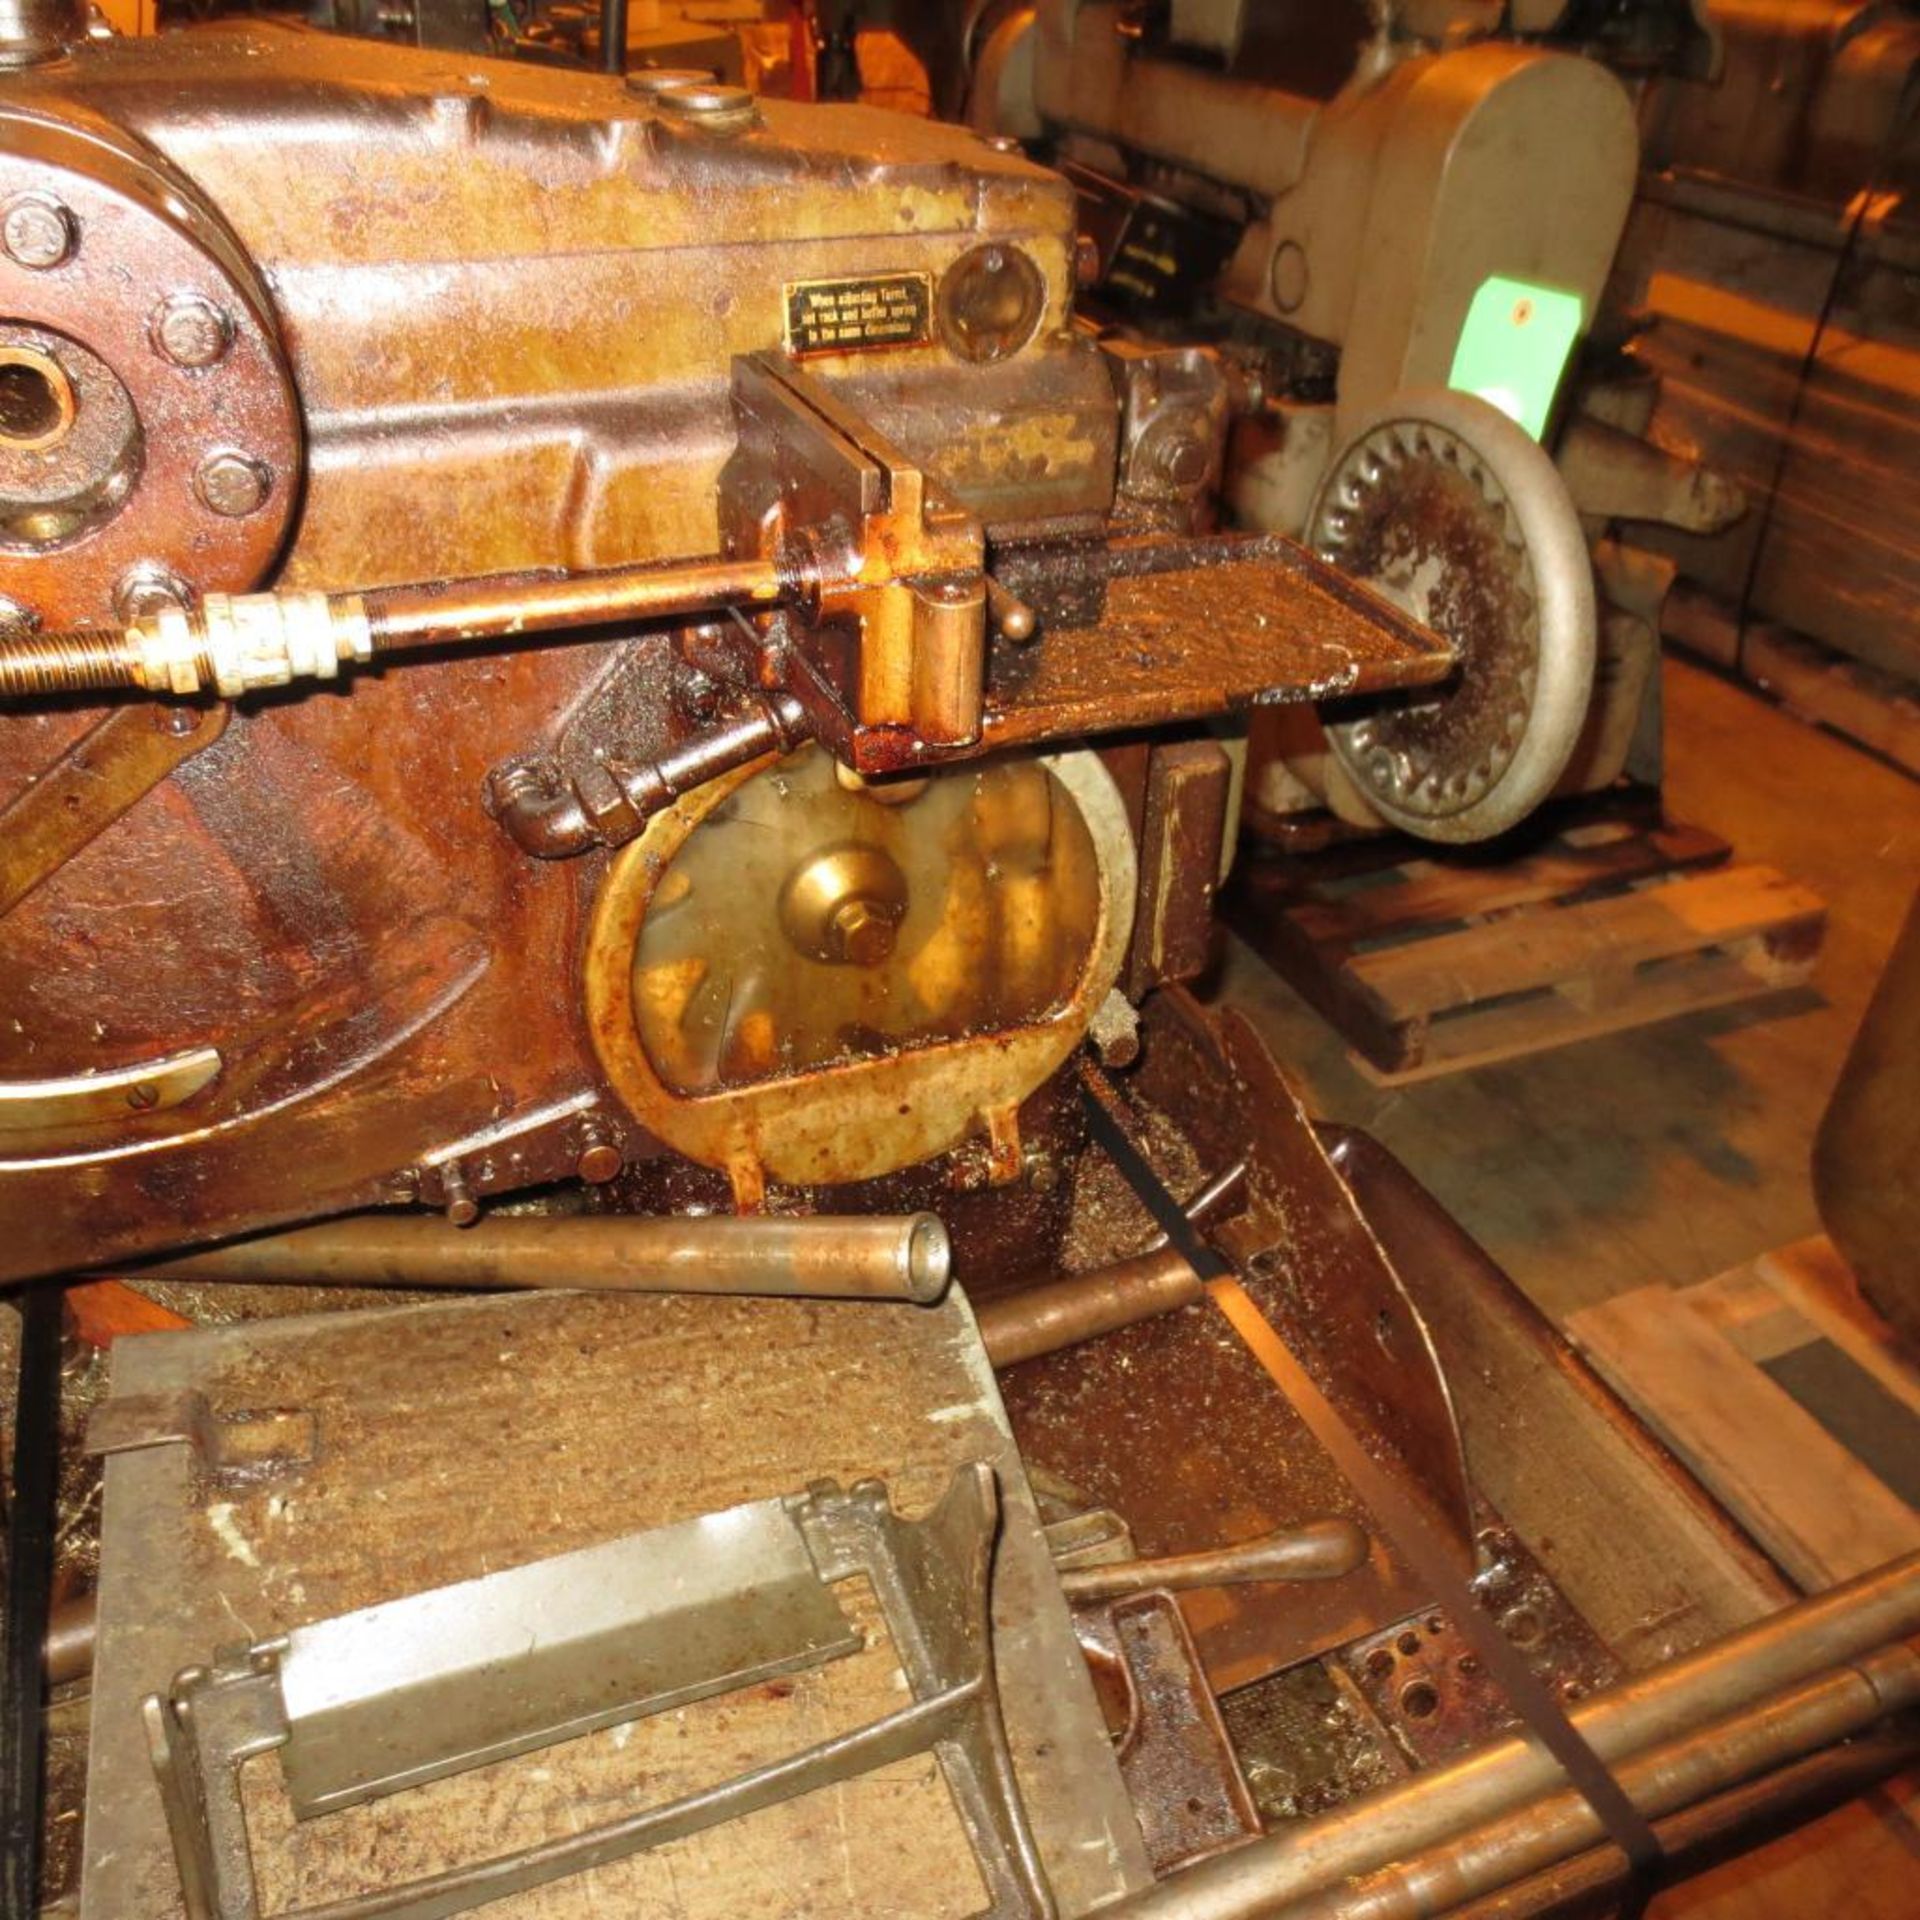 Index 1-1/4" B60 Single Spindle Auctomatic Screw Machine S/N 6014138 *RIGGING $100* - Image 3 of 6